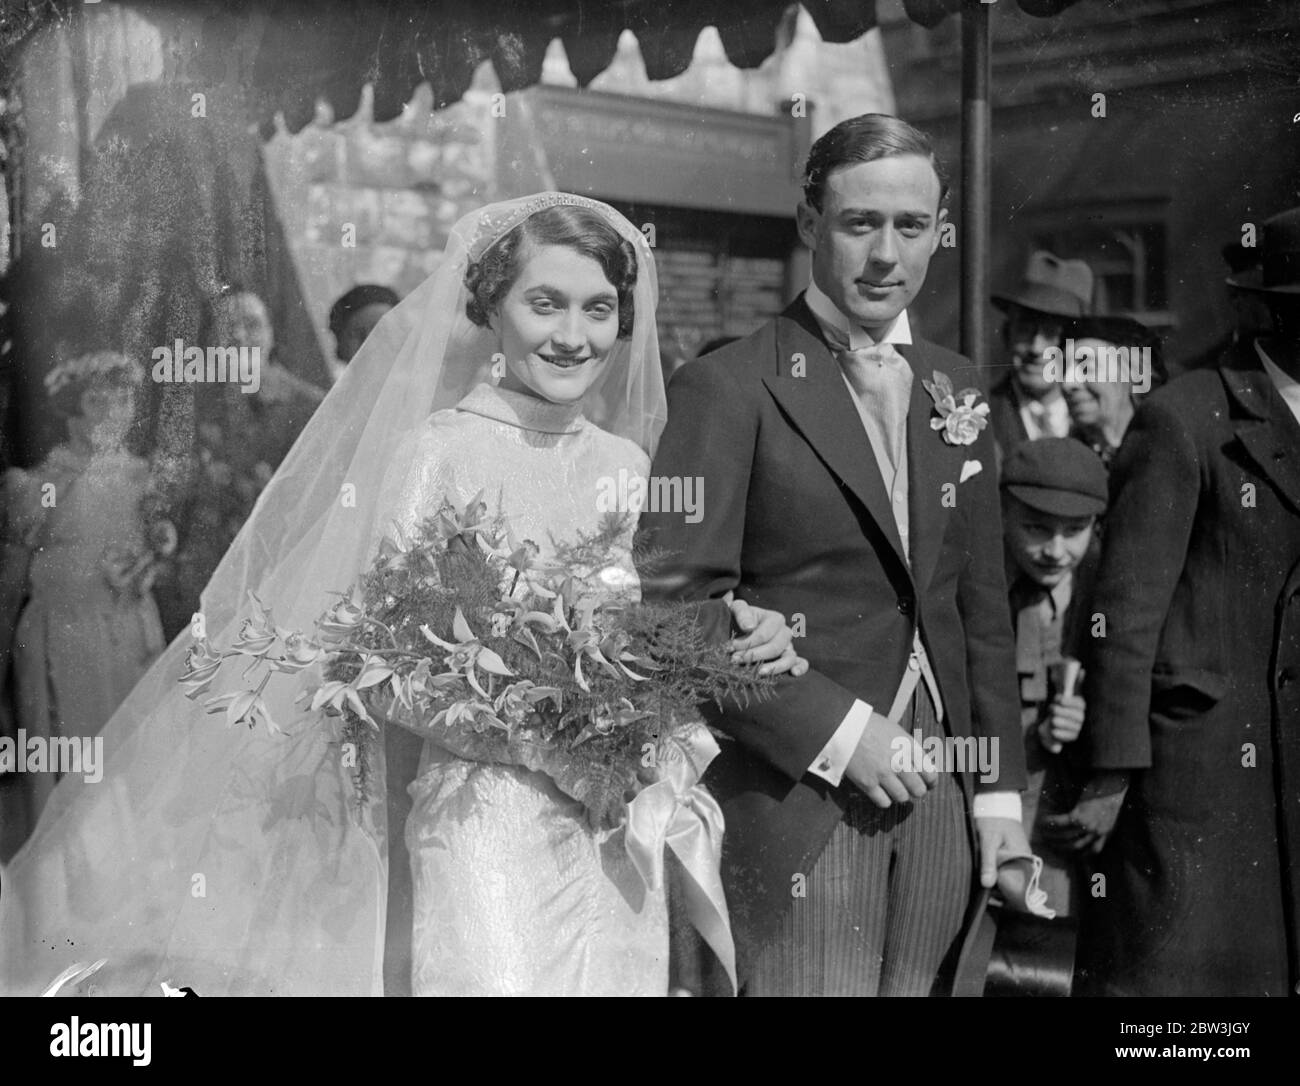 RAF bridegroom at London church . Mr T A R Parselle , Royal Air Force was married to Miss D Lewis Hall at St Peter ' s Church Cranley Gardens . Photo shows , the bride and groom . 24 April 1936 Stock Photo